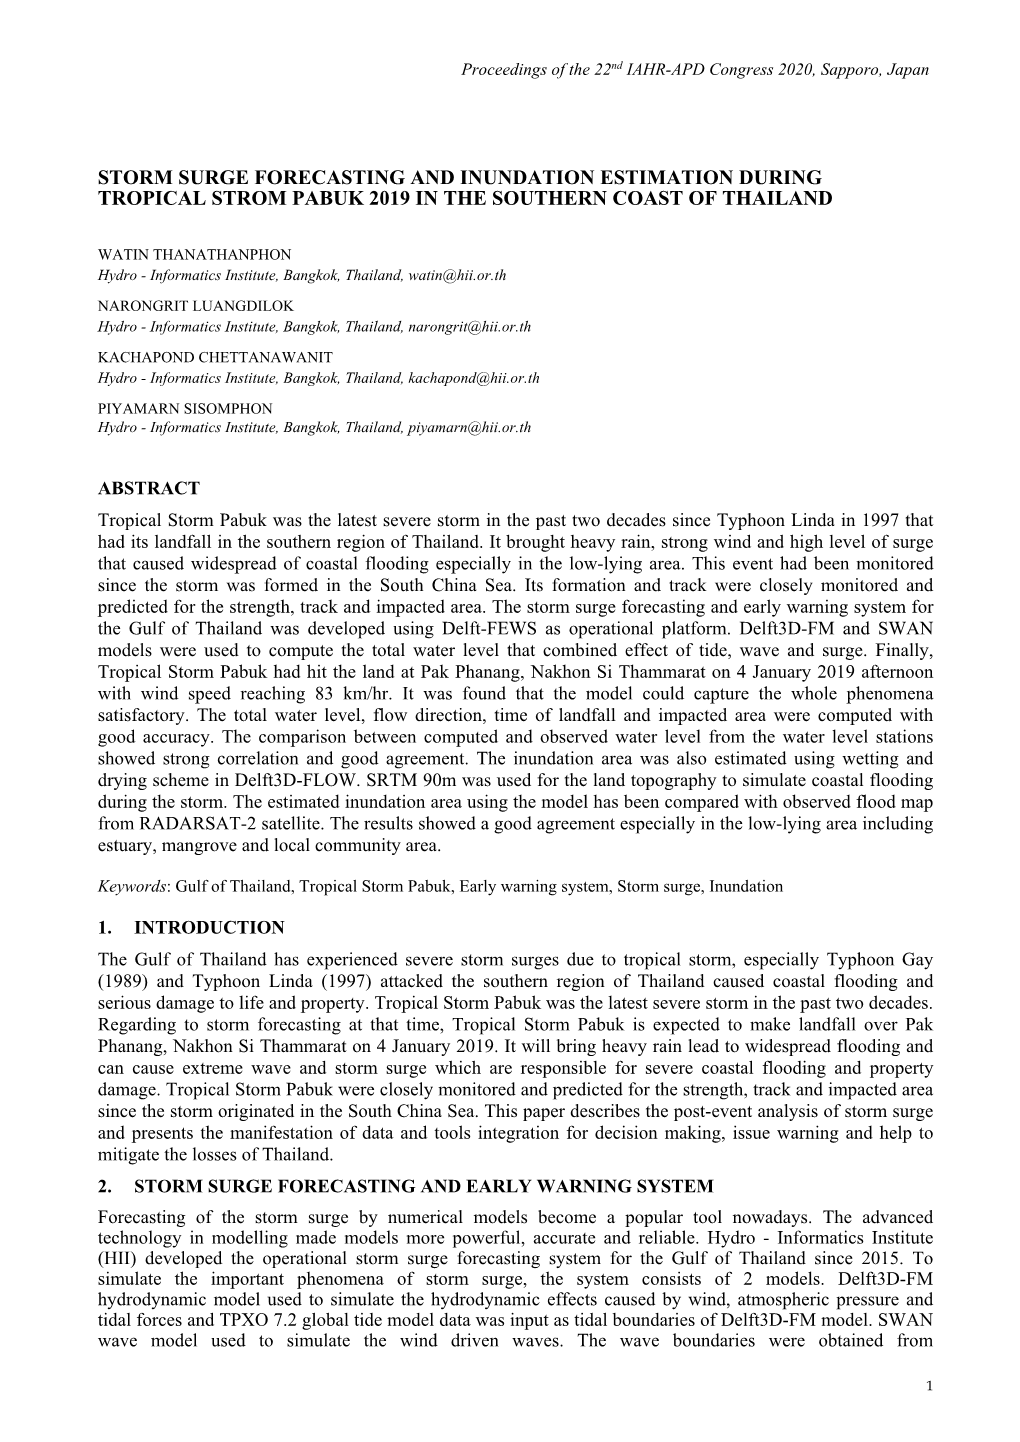 Storm Surge Forecasting and Inundation Estimation During Tropical Strom Pabuk 2019 in the Southern Coast of Thailand